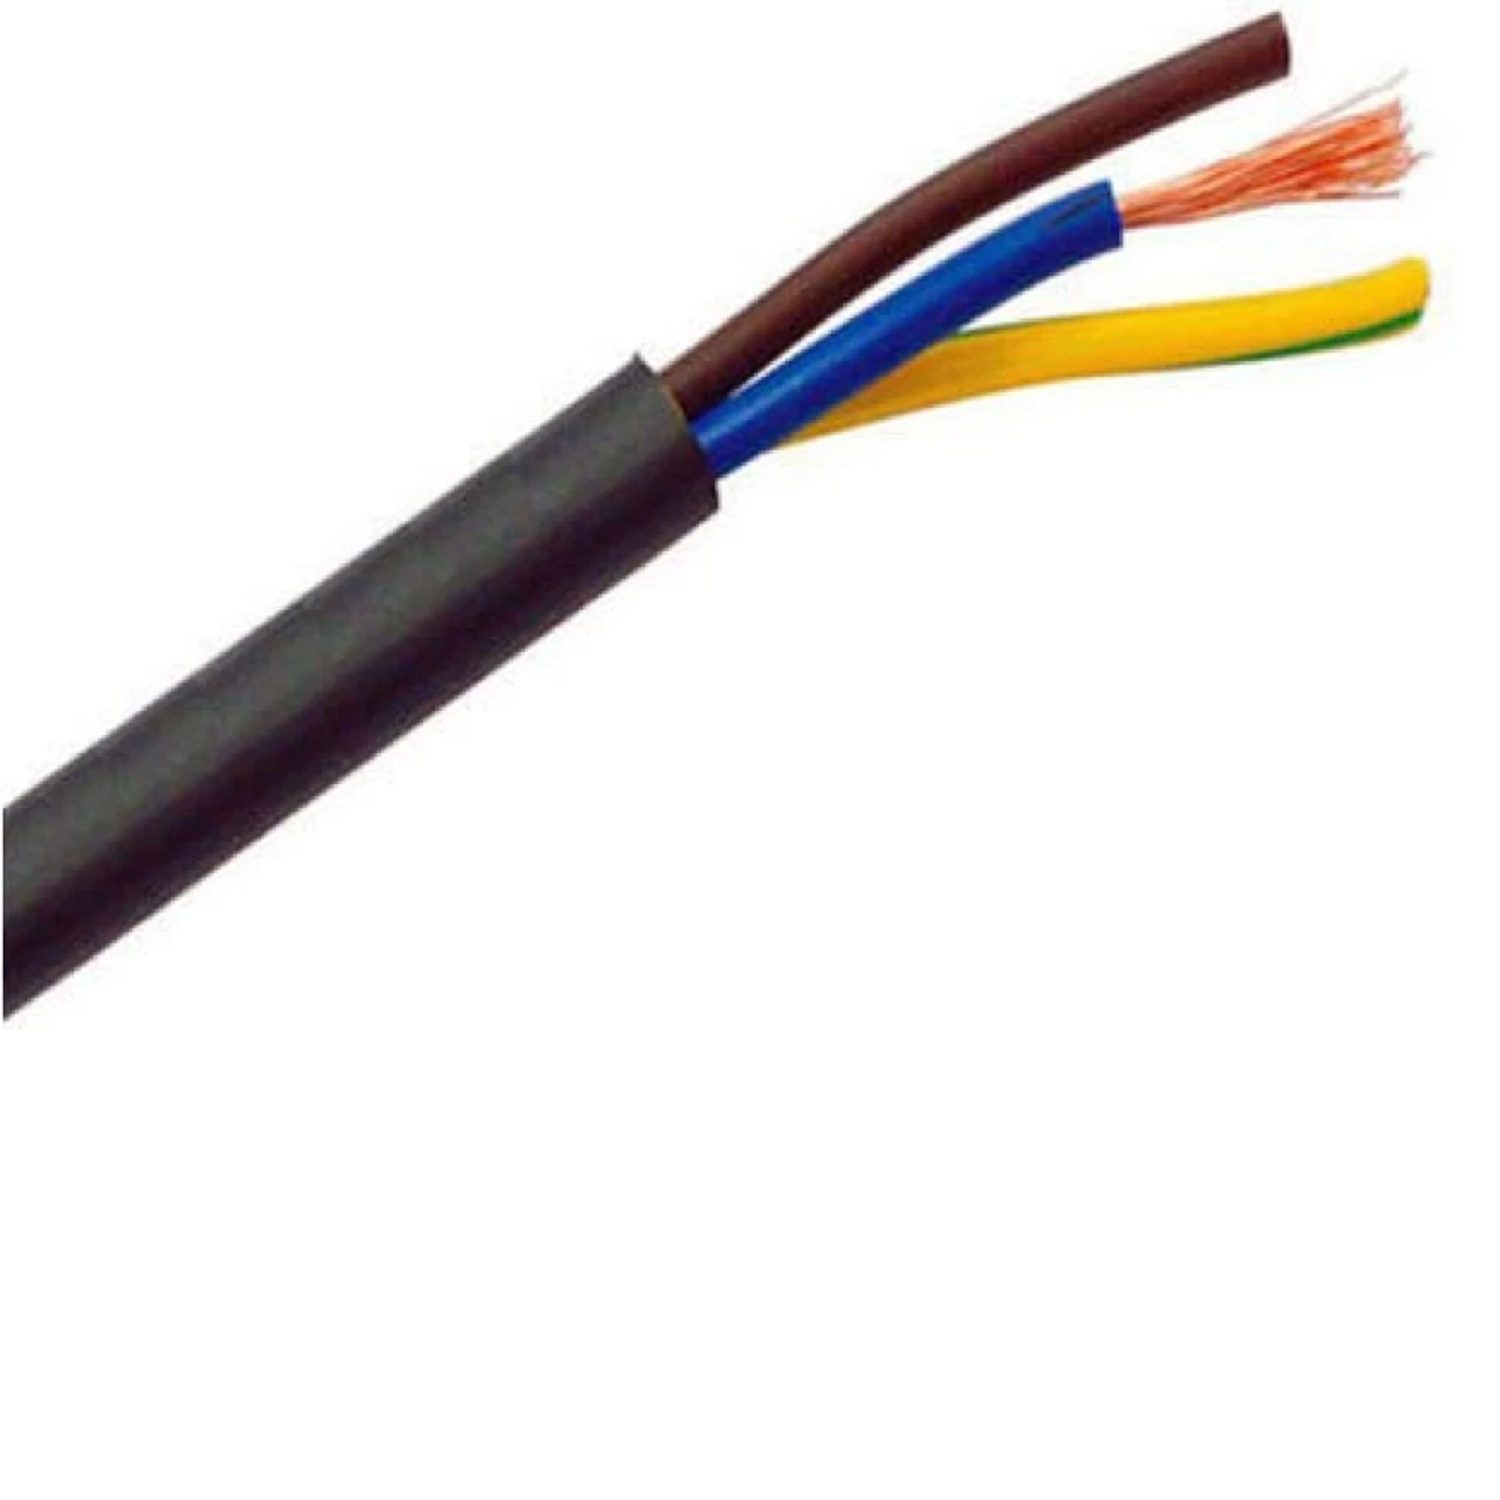 4.0 Sqmm Finolex Copper Flexible Cable With PVC Insulated For Domestic 38 Industrial Uses